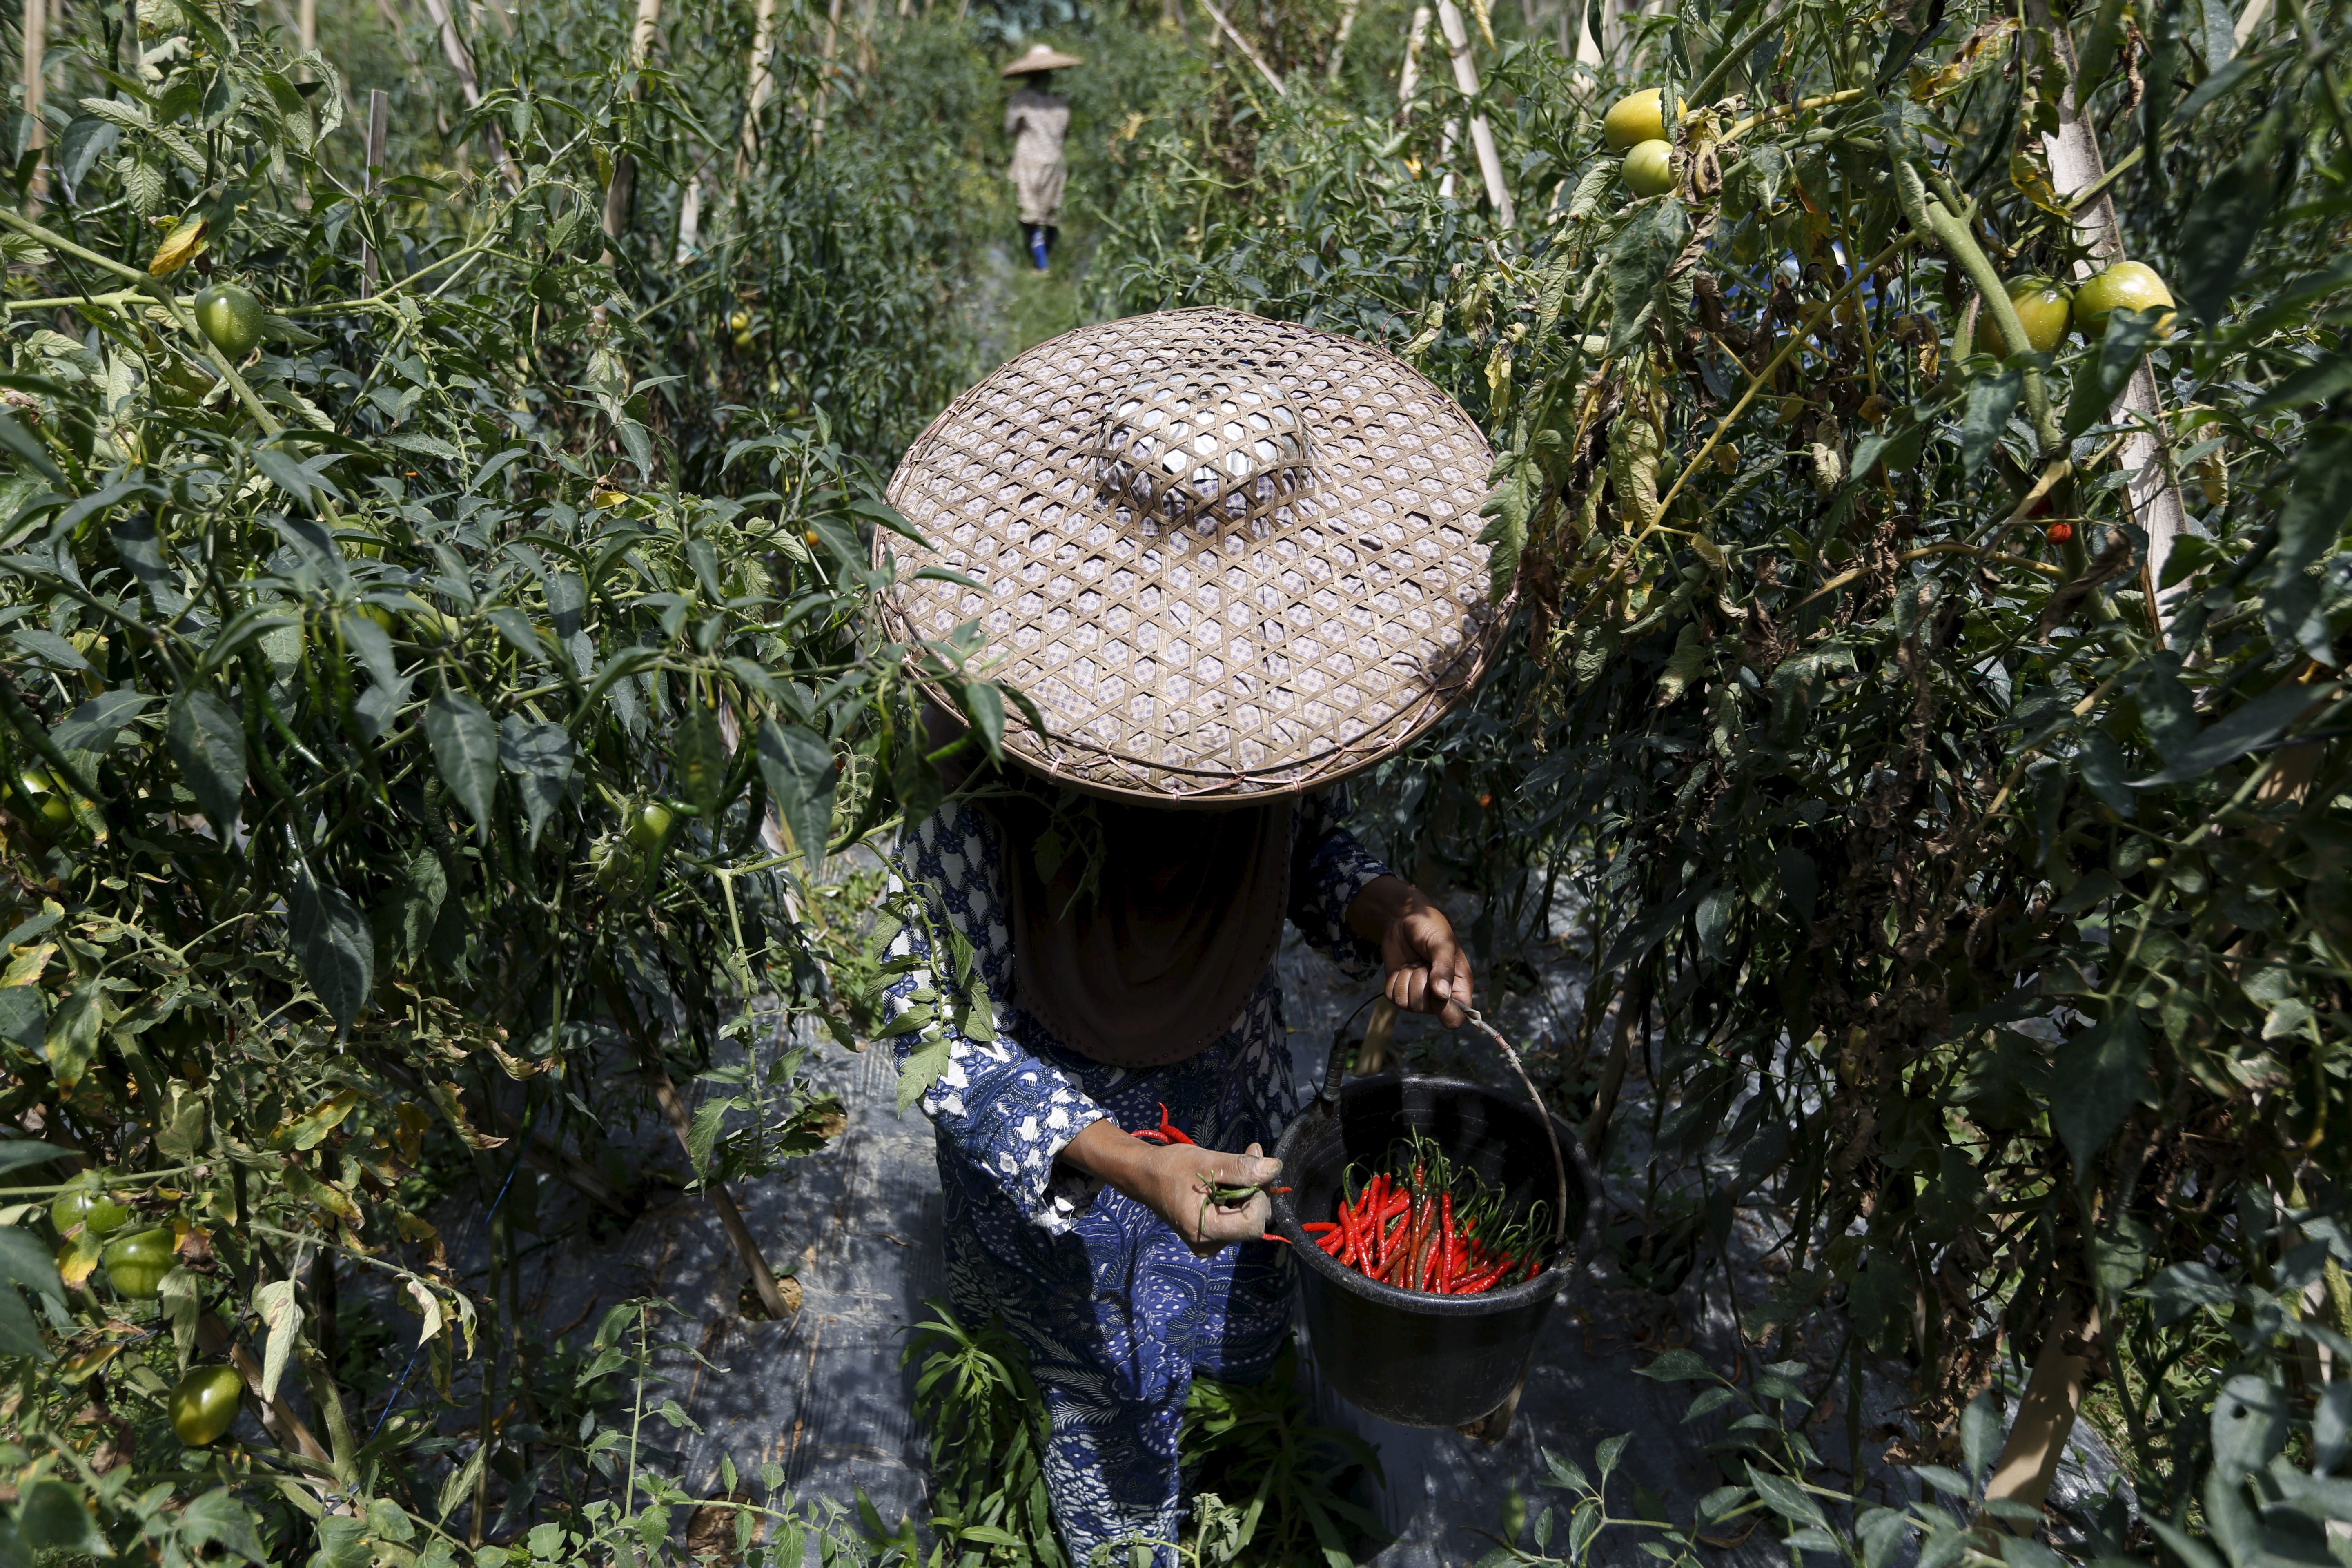 A woman picks chillies during harvest in Indonesia